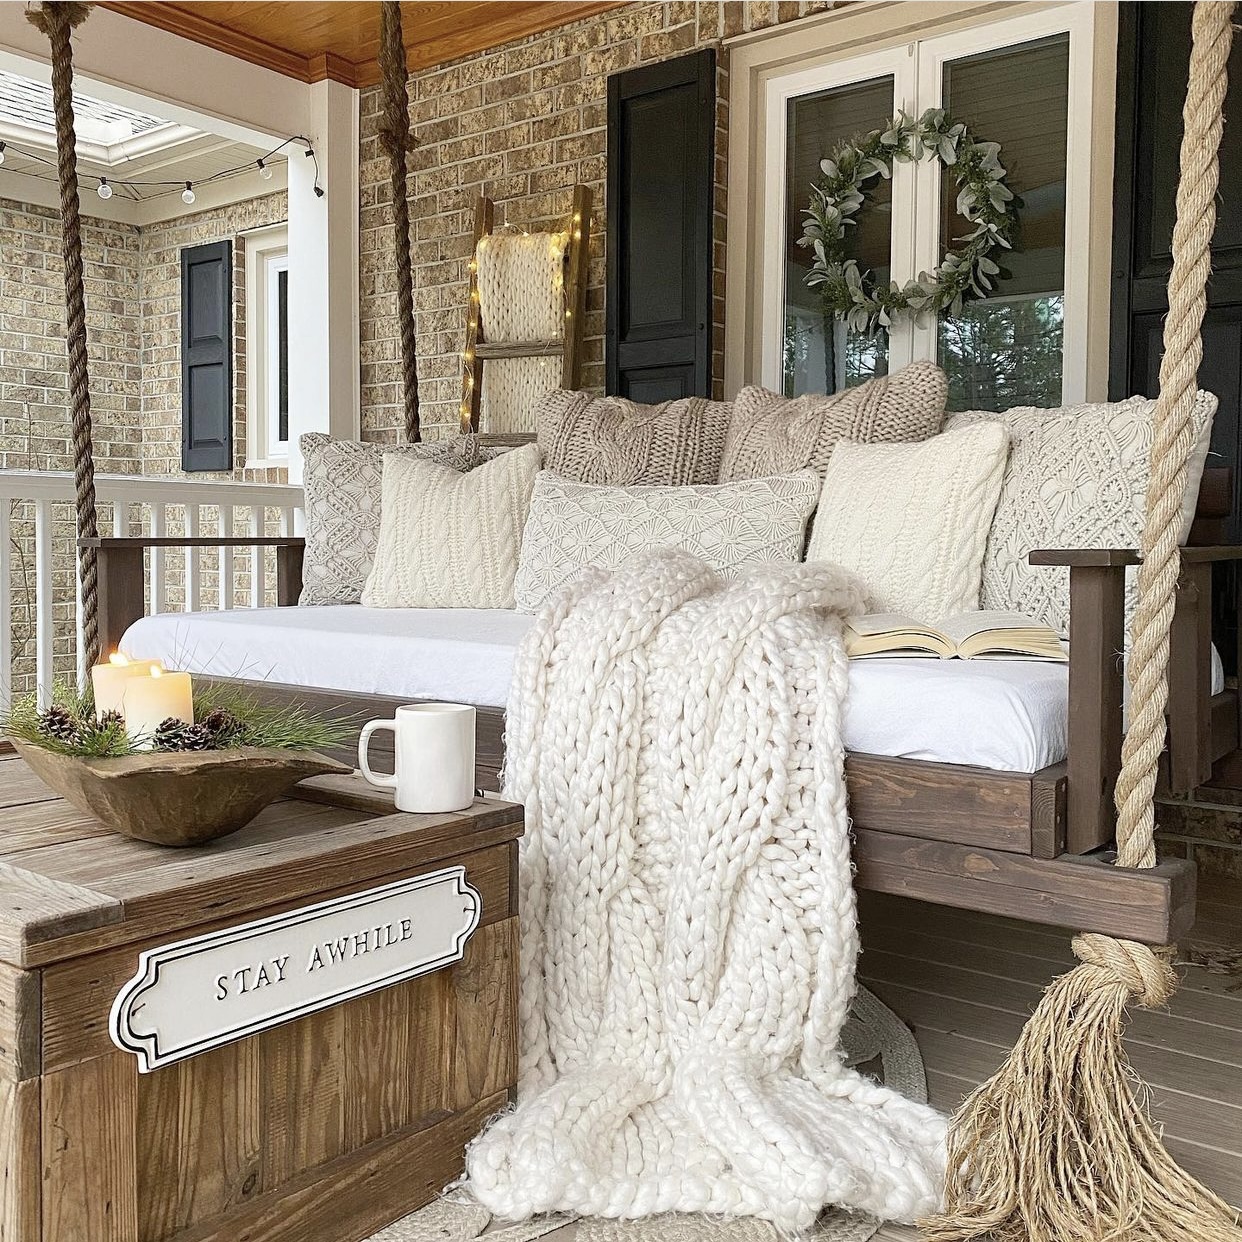 Farmhouse front porch swing bed with coffee table in front of it with a candle centerpiece on it.